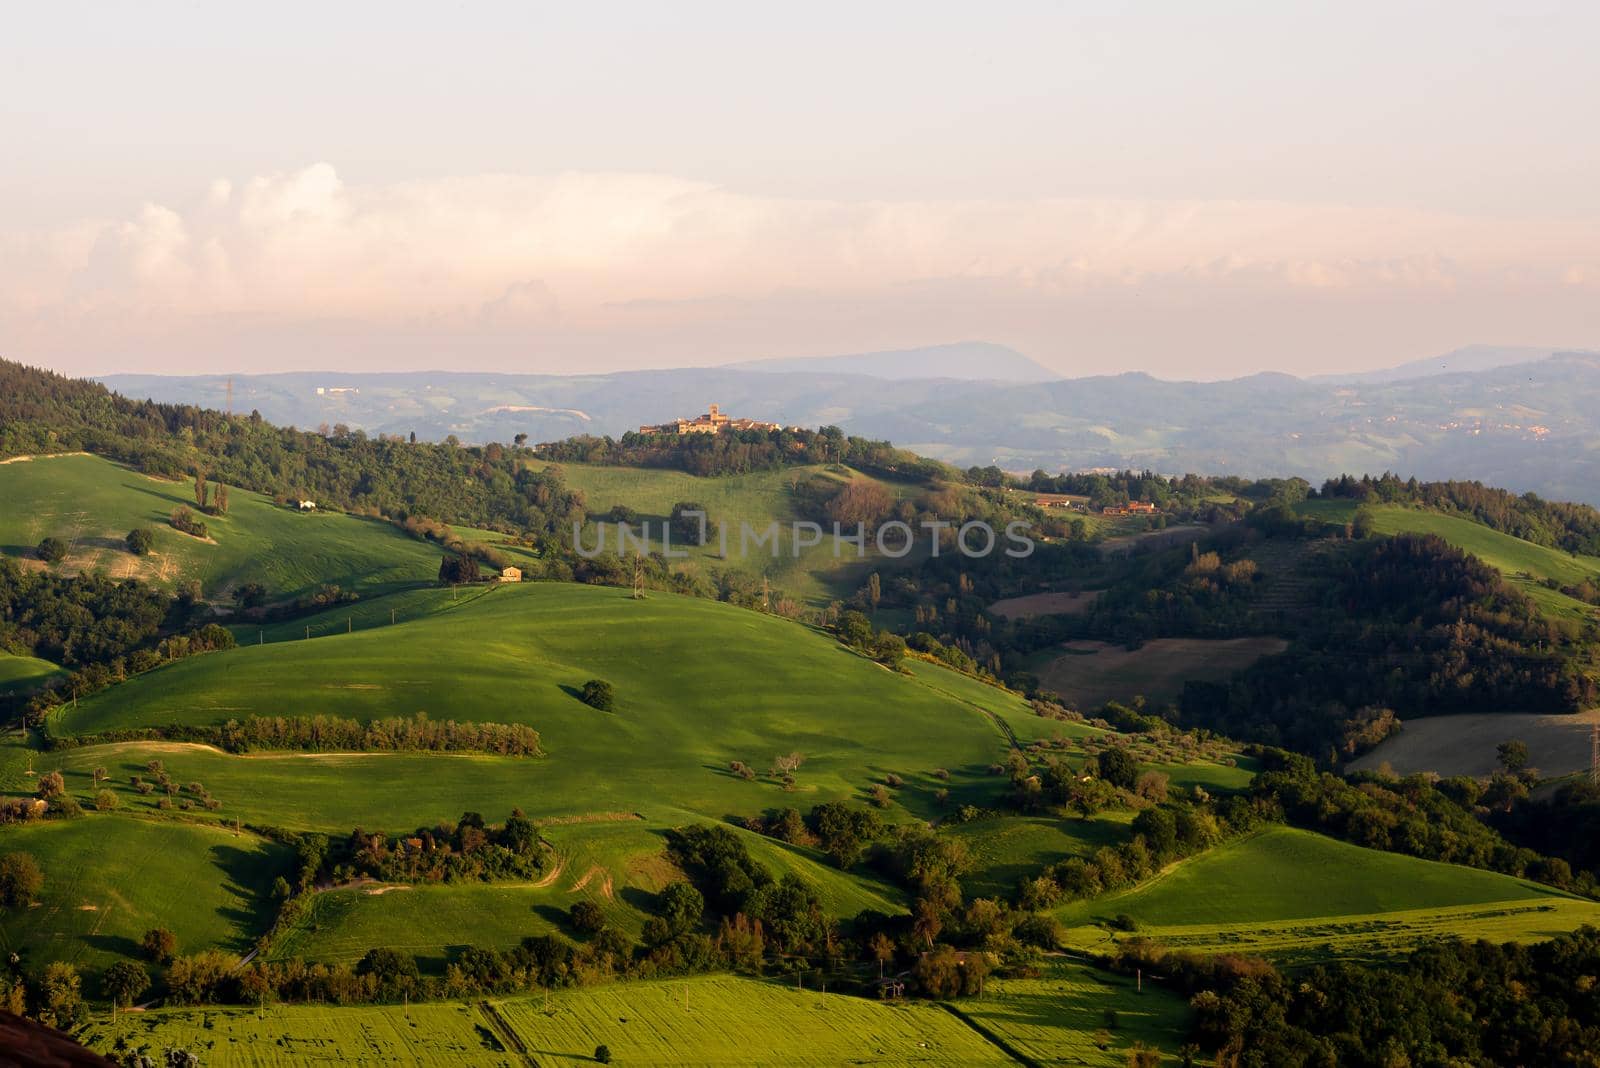 View di Montefabbri from Belvedere Fogliense, Marche, Italy, at evening before the sunset